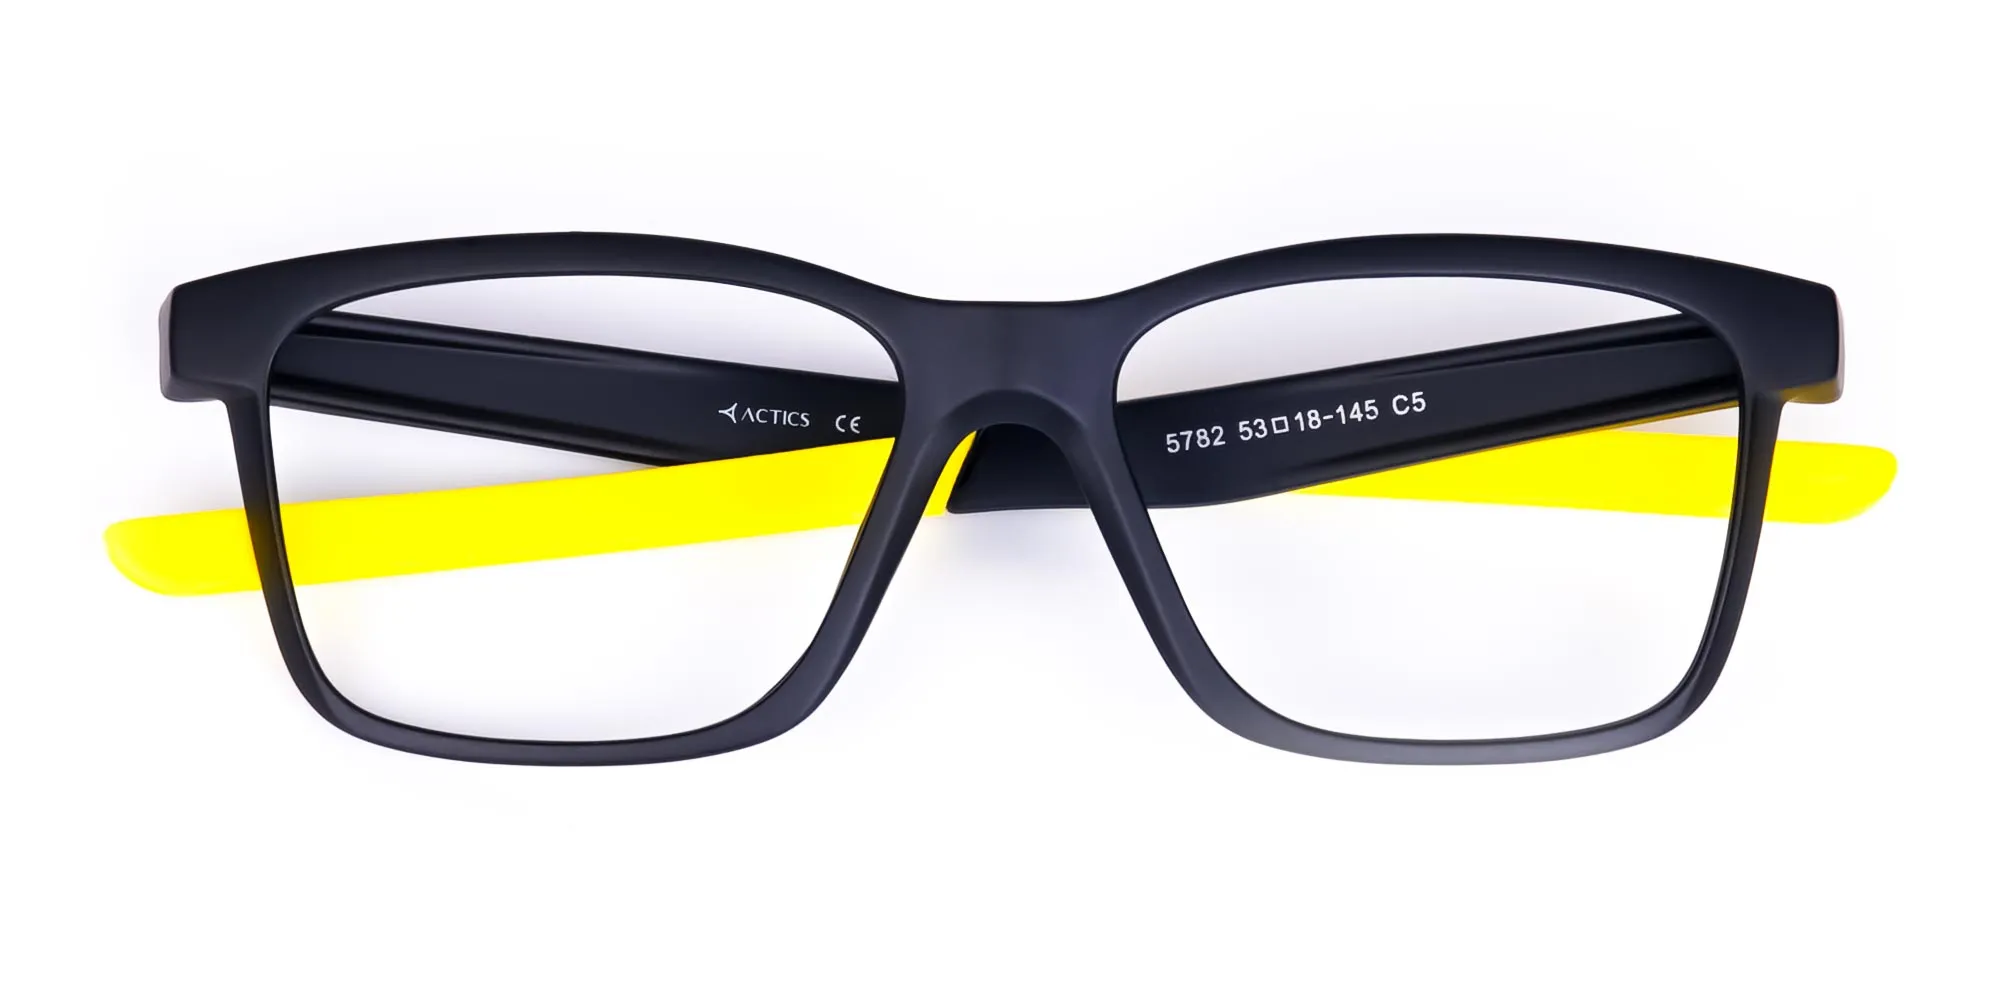 Black and Bright Yellow Cycling Glasses For Women In Rectangular Shape-3